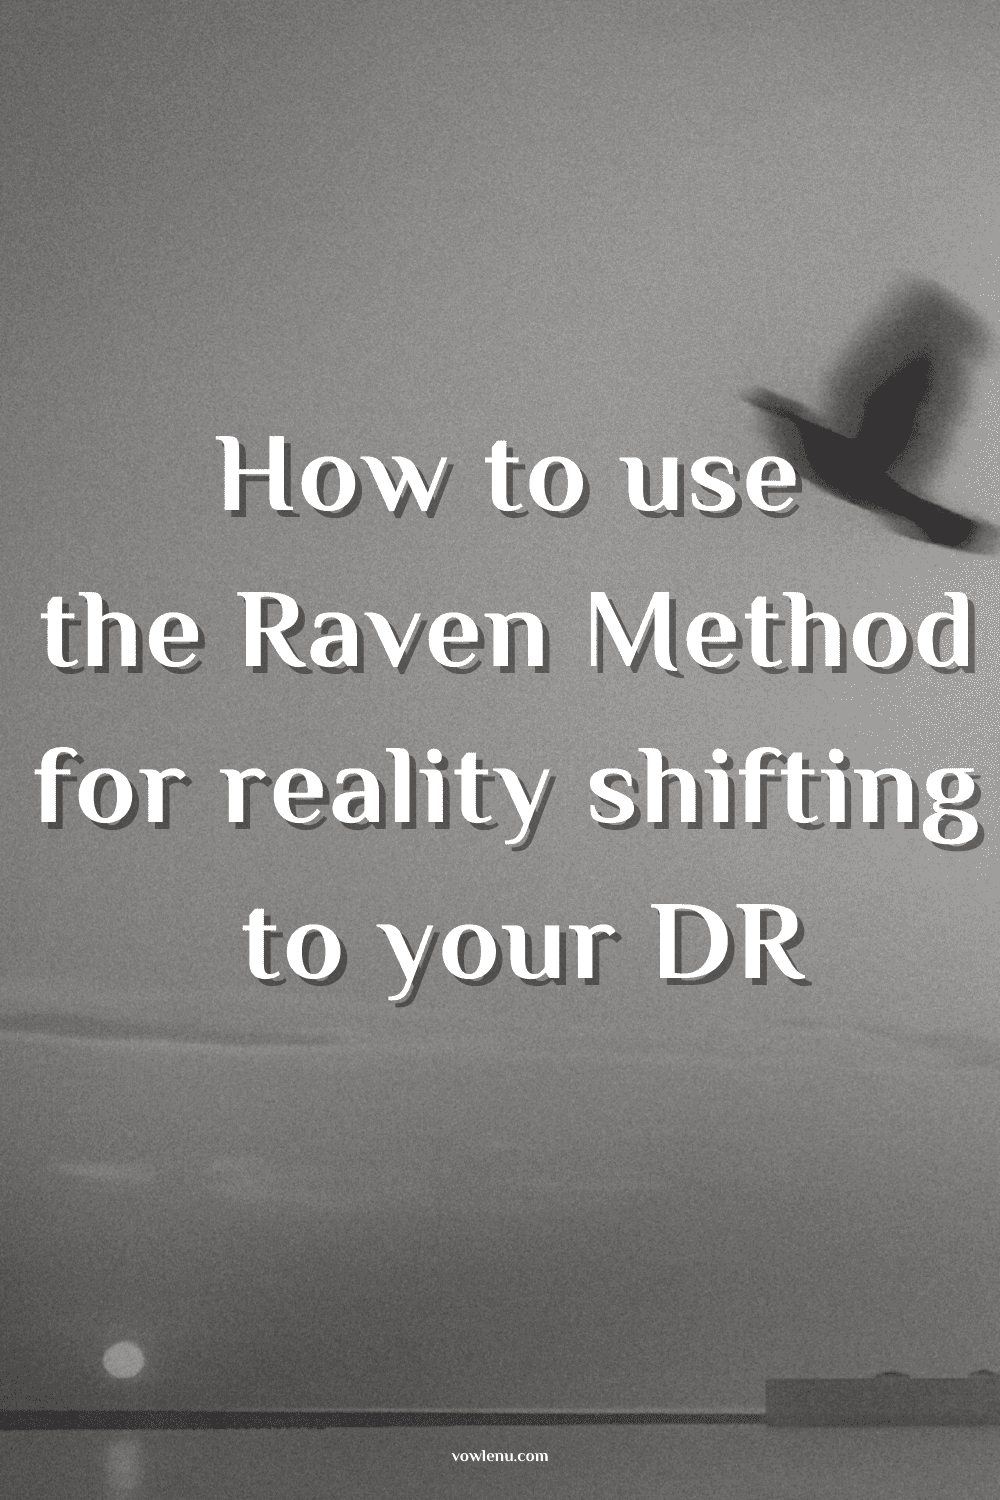 How to use the Raven Method for reality shifting to your DR.